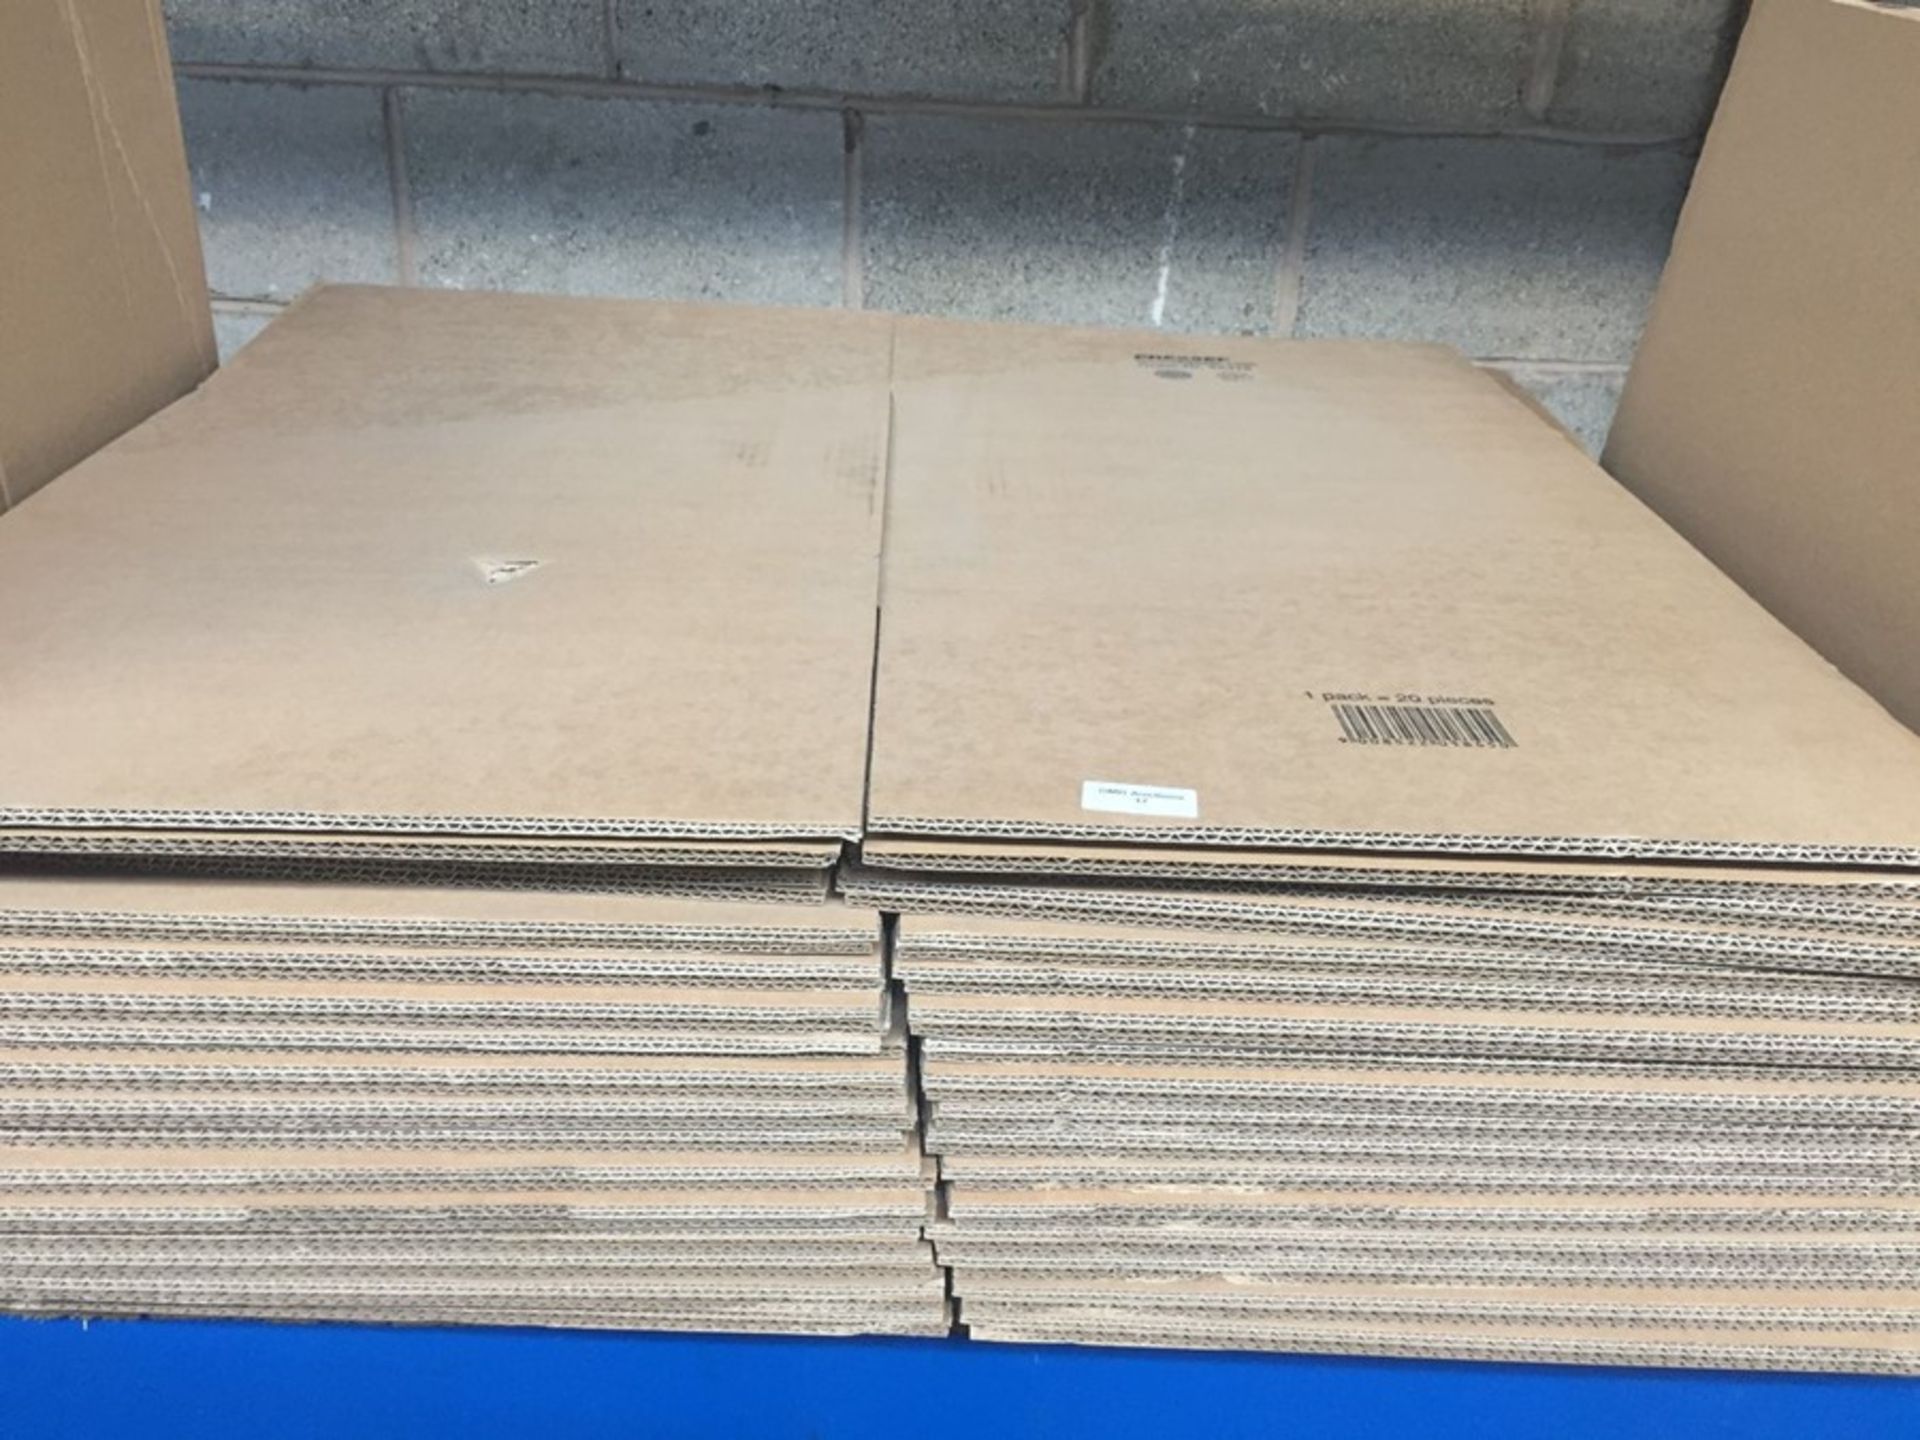 1 LOT TO CONTAIN 17 PRESSEL FLATPACK CARDBOARD BOXES MEDIUM SIZE